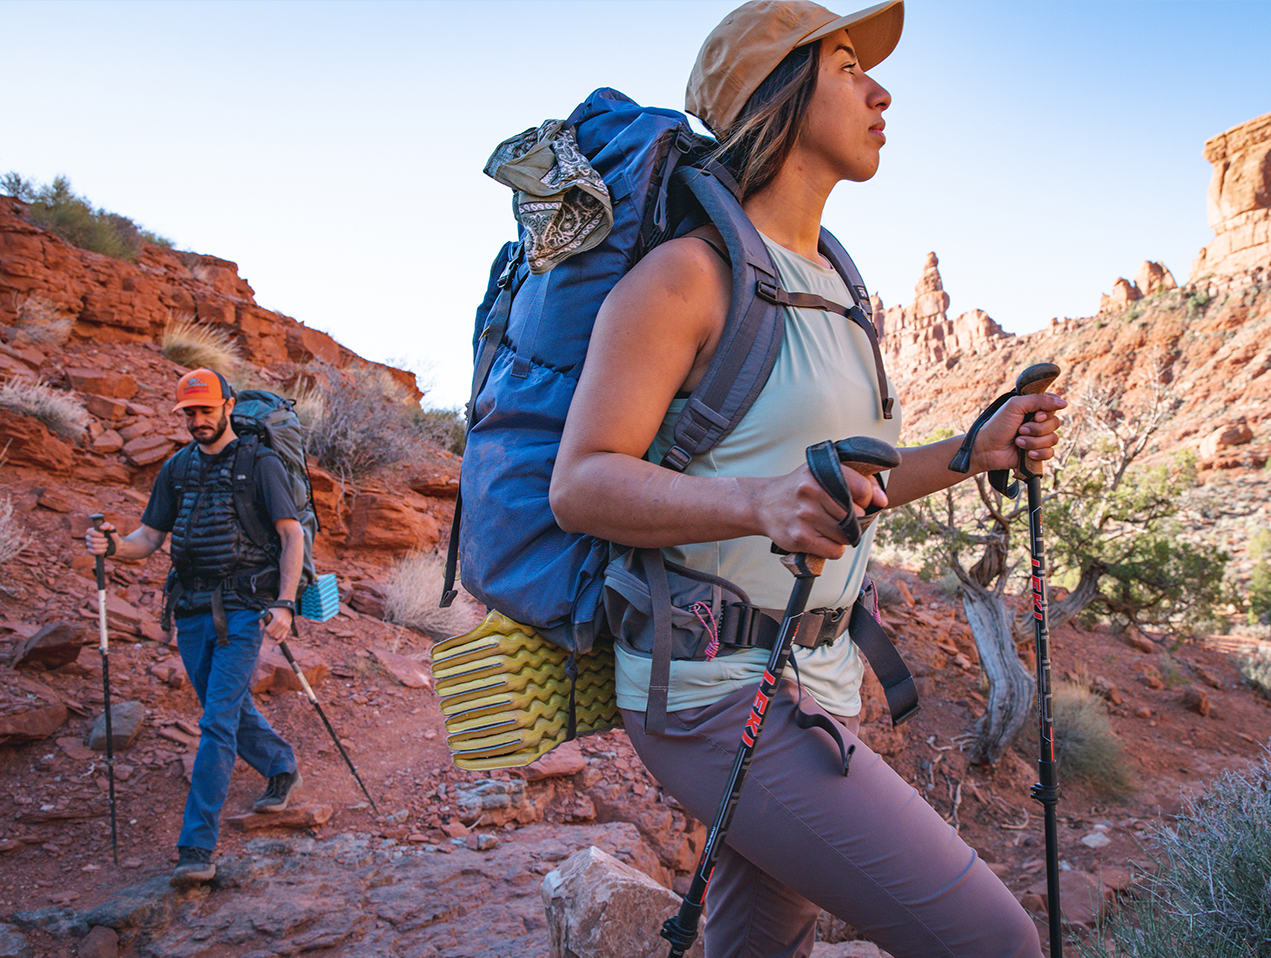 On the move! Two backpackers wearing the PCT on trail in the Utah Desert